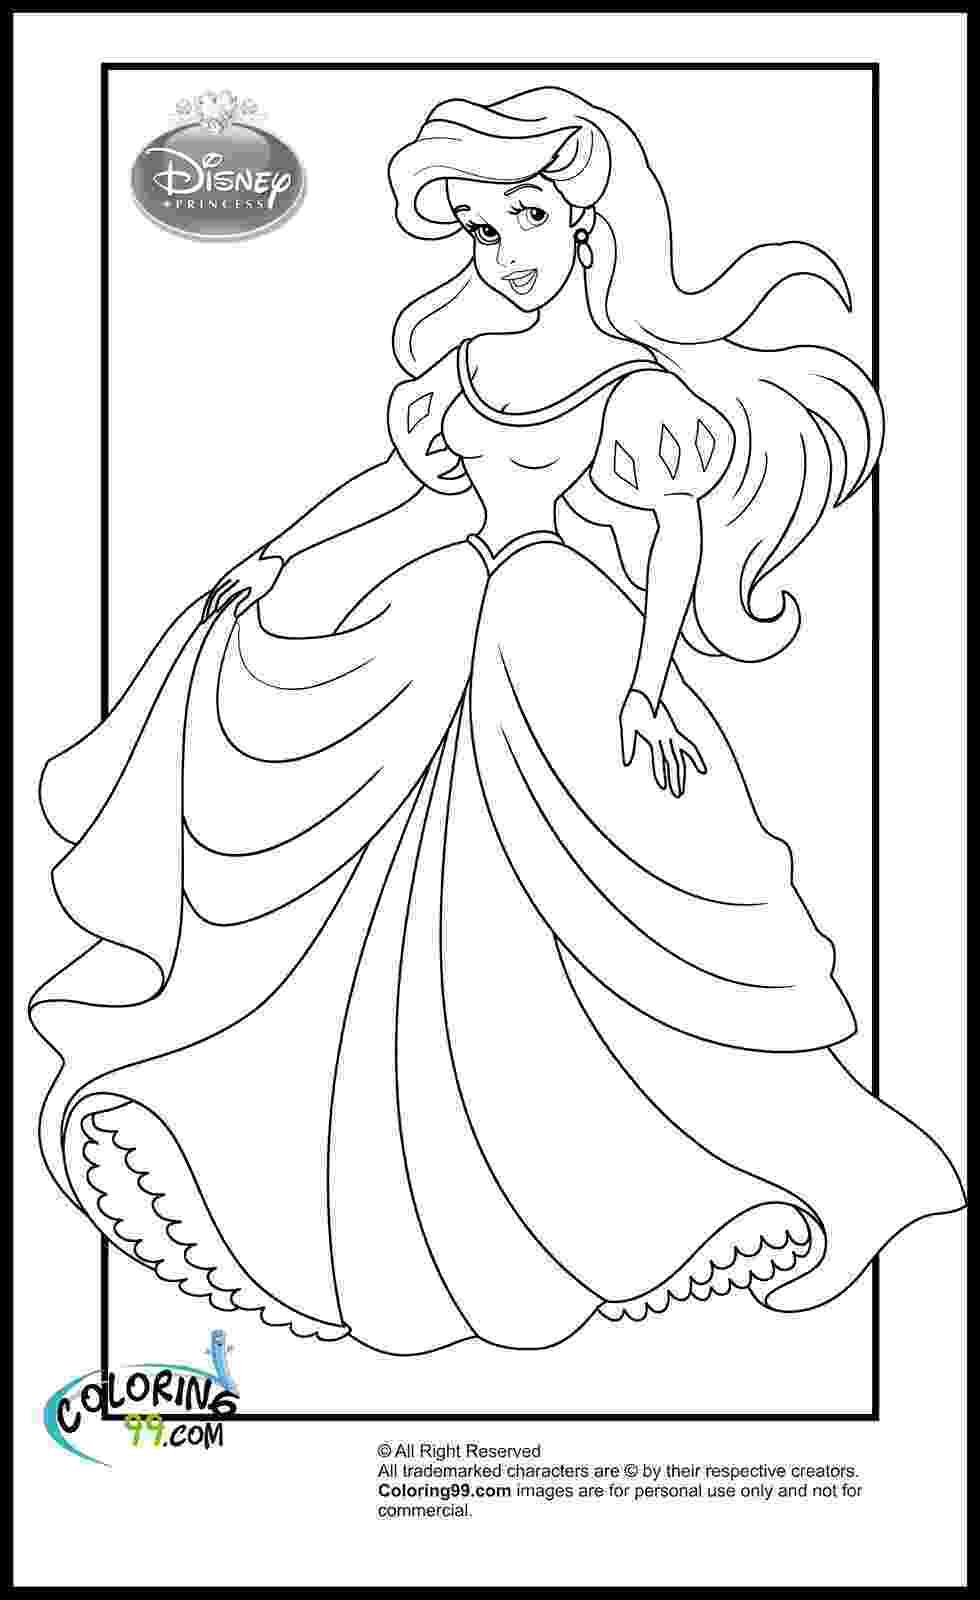 printable coloring pages for disney princess princess belle coloring pages to download and print for free pages princess coloring for printable disney 